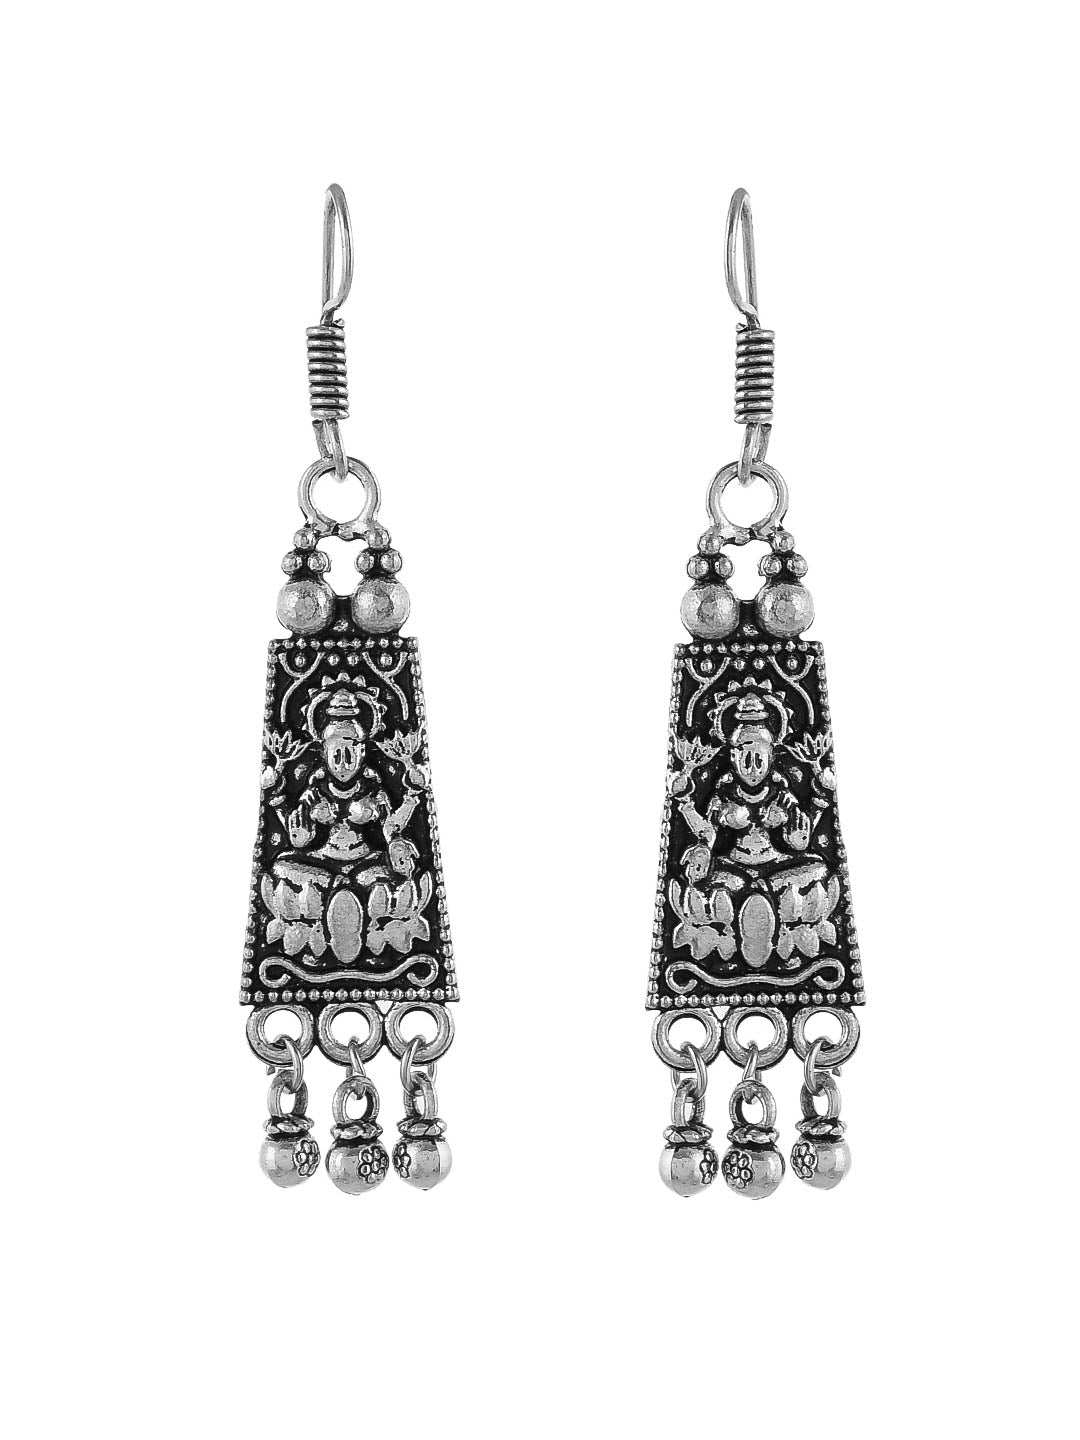 Trendy Oxidised Silver Plated Lakshmi Statement Necklace With Drop Earrings For Women Girls